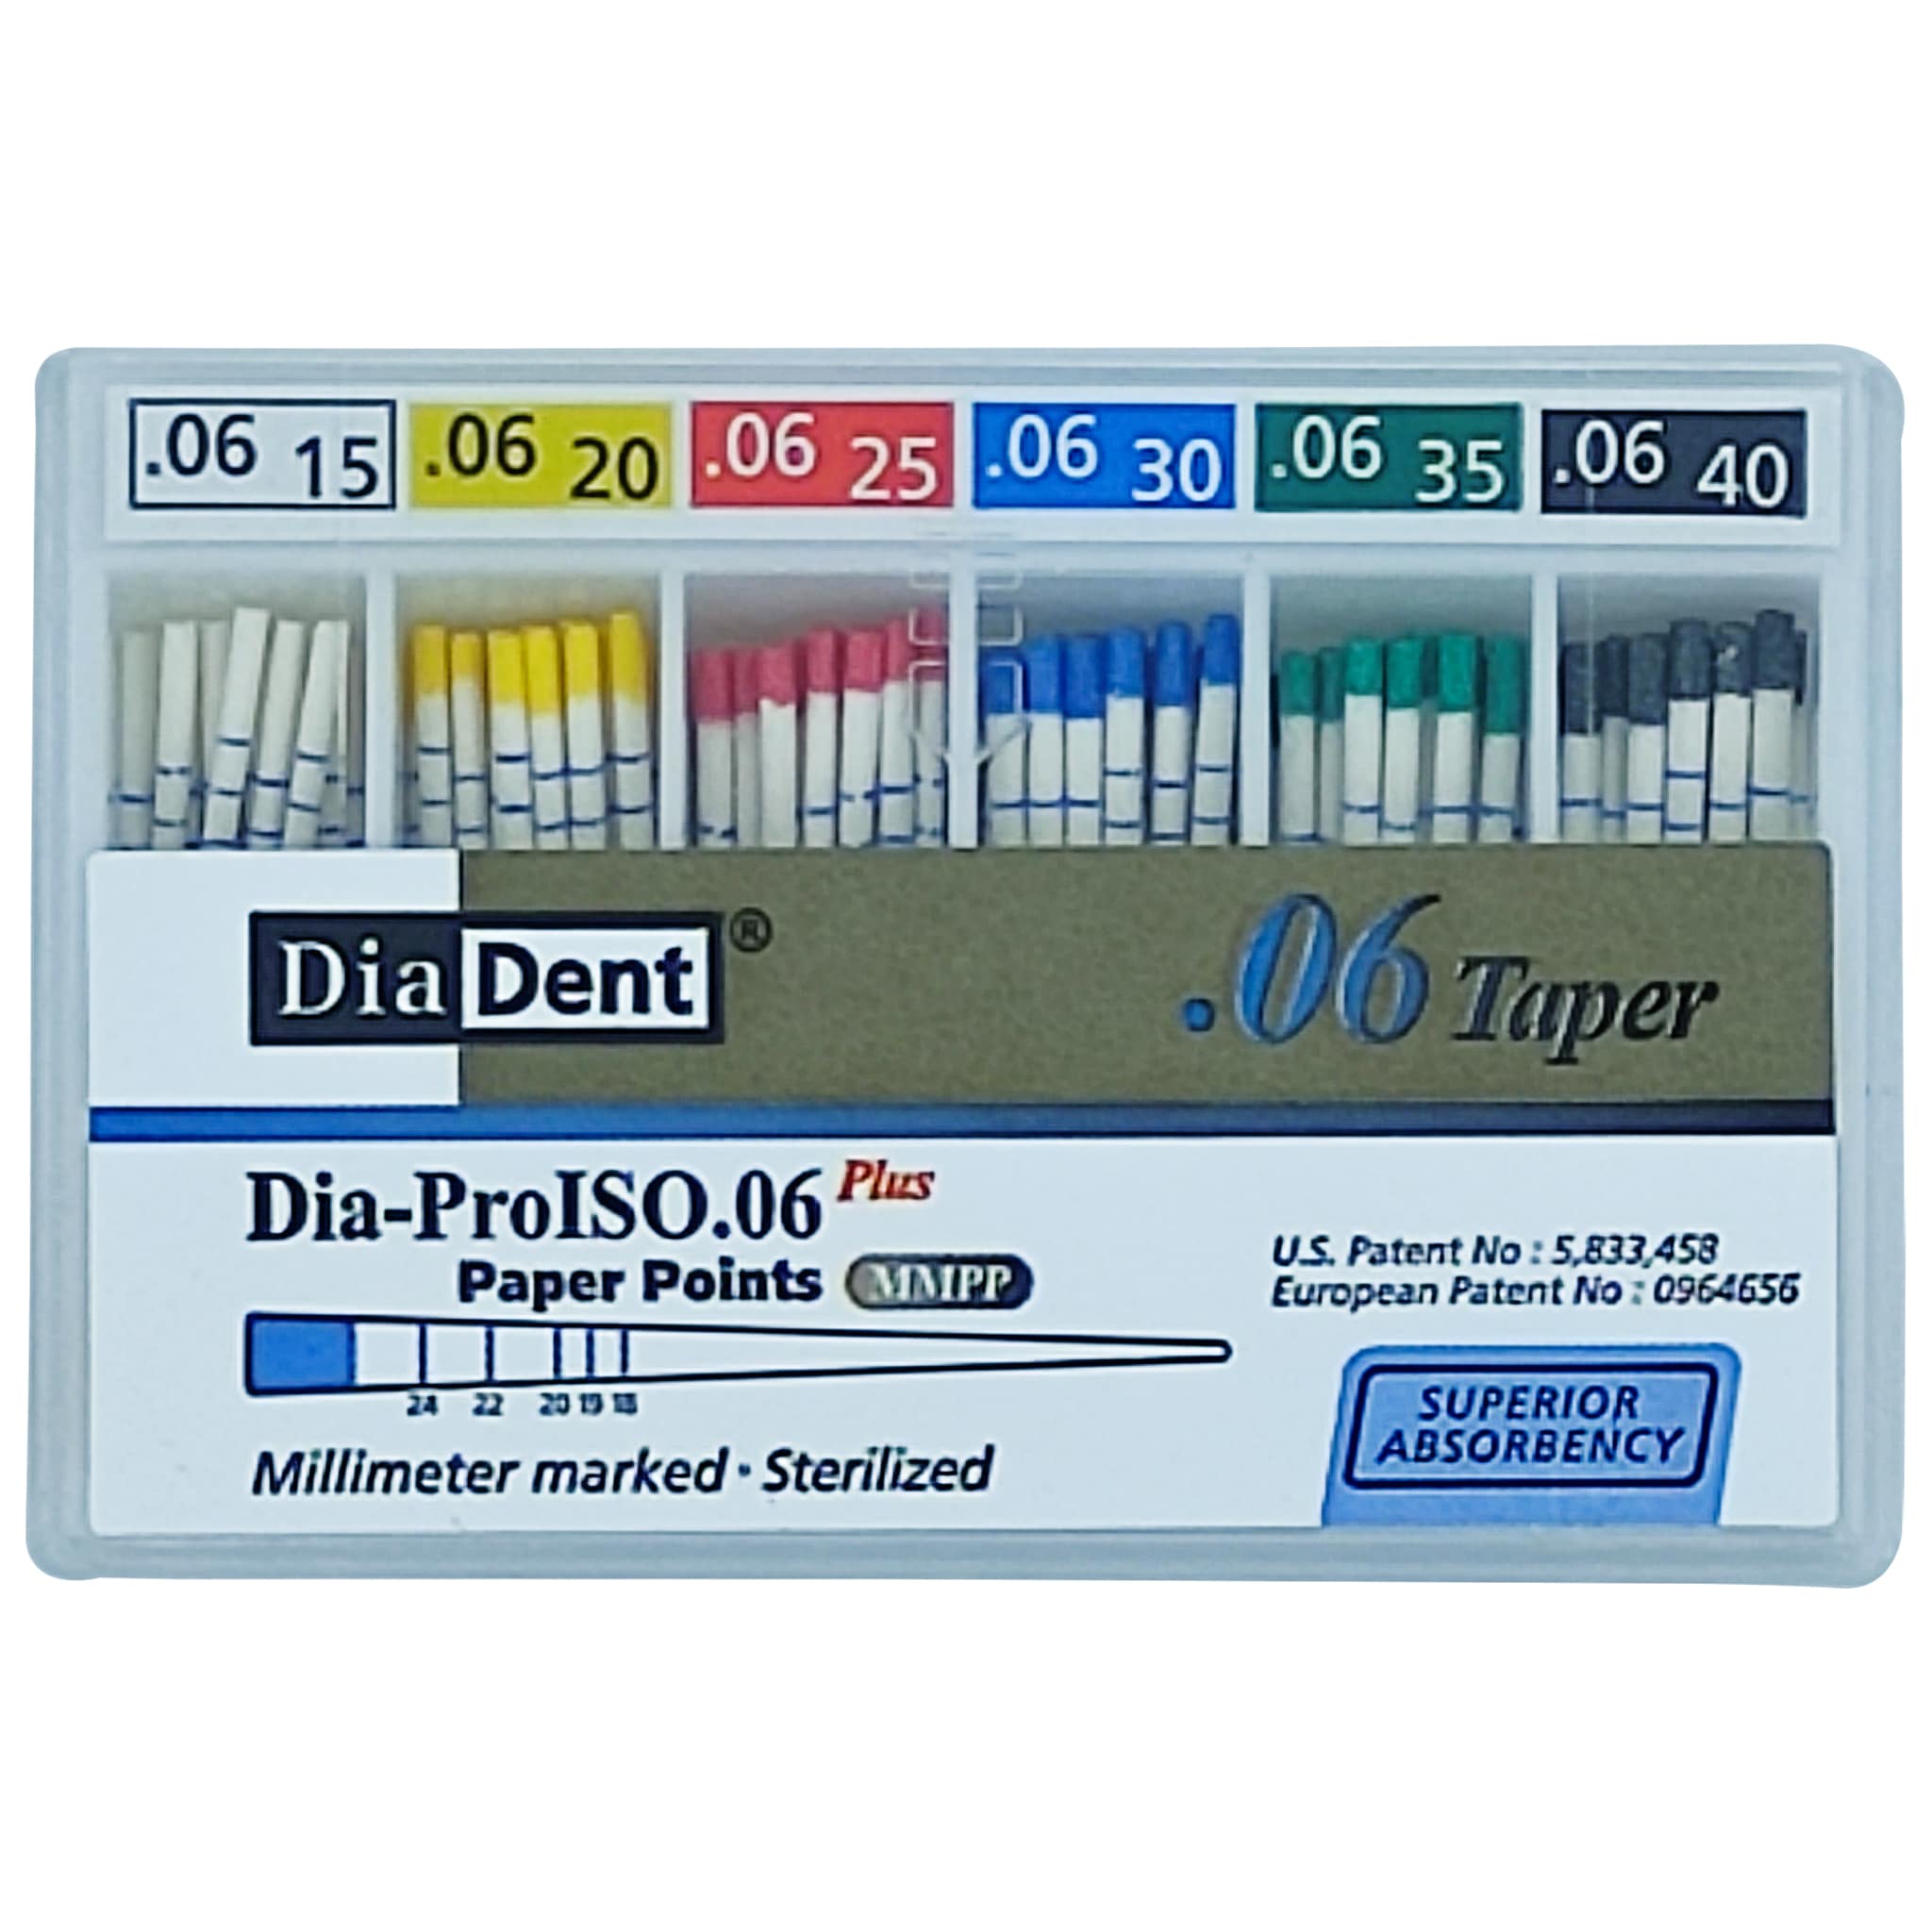 Diadent Paper Points 6% Dia-ProISO GT (mm-Marked) - (.06 Taper)